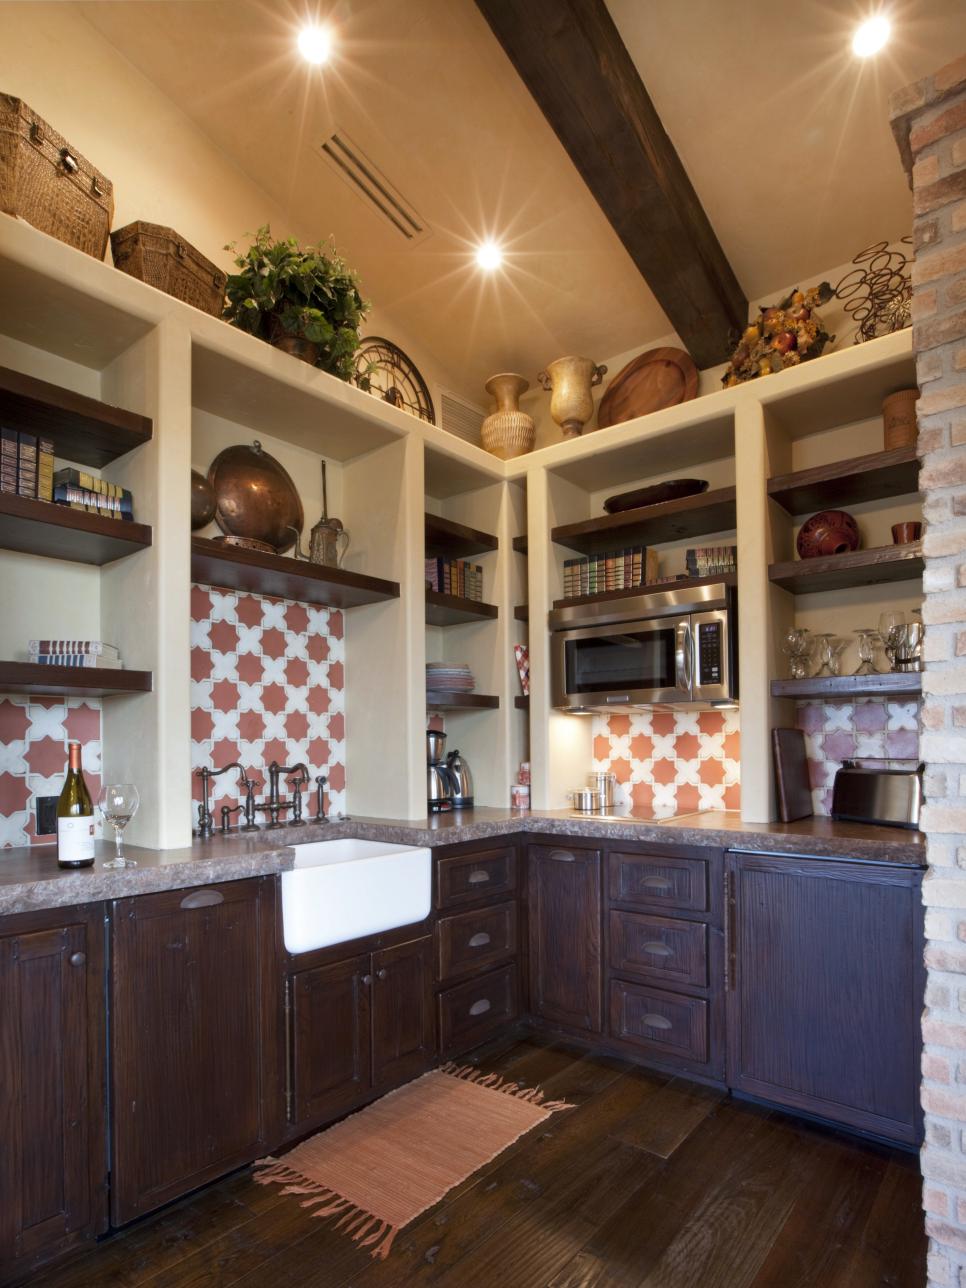 Old World Kitchen With Dark Wood Cabinetry and White Shelving